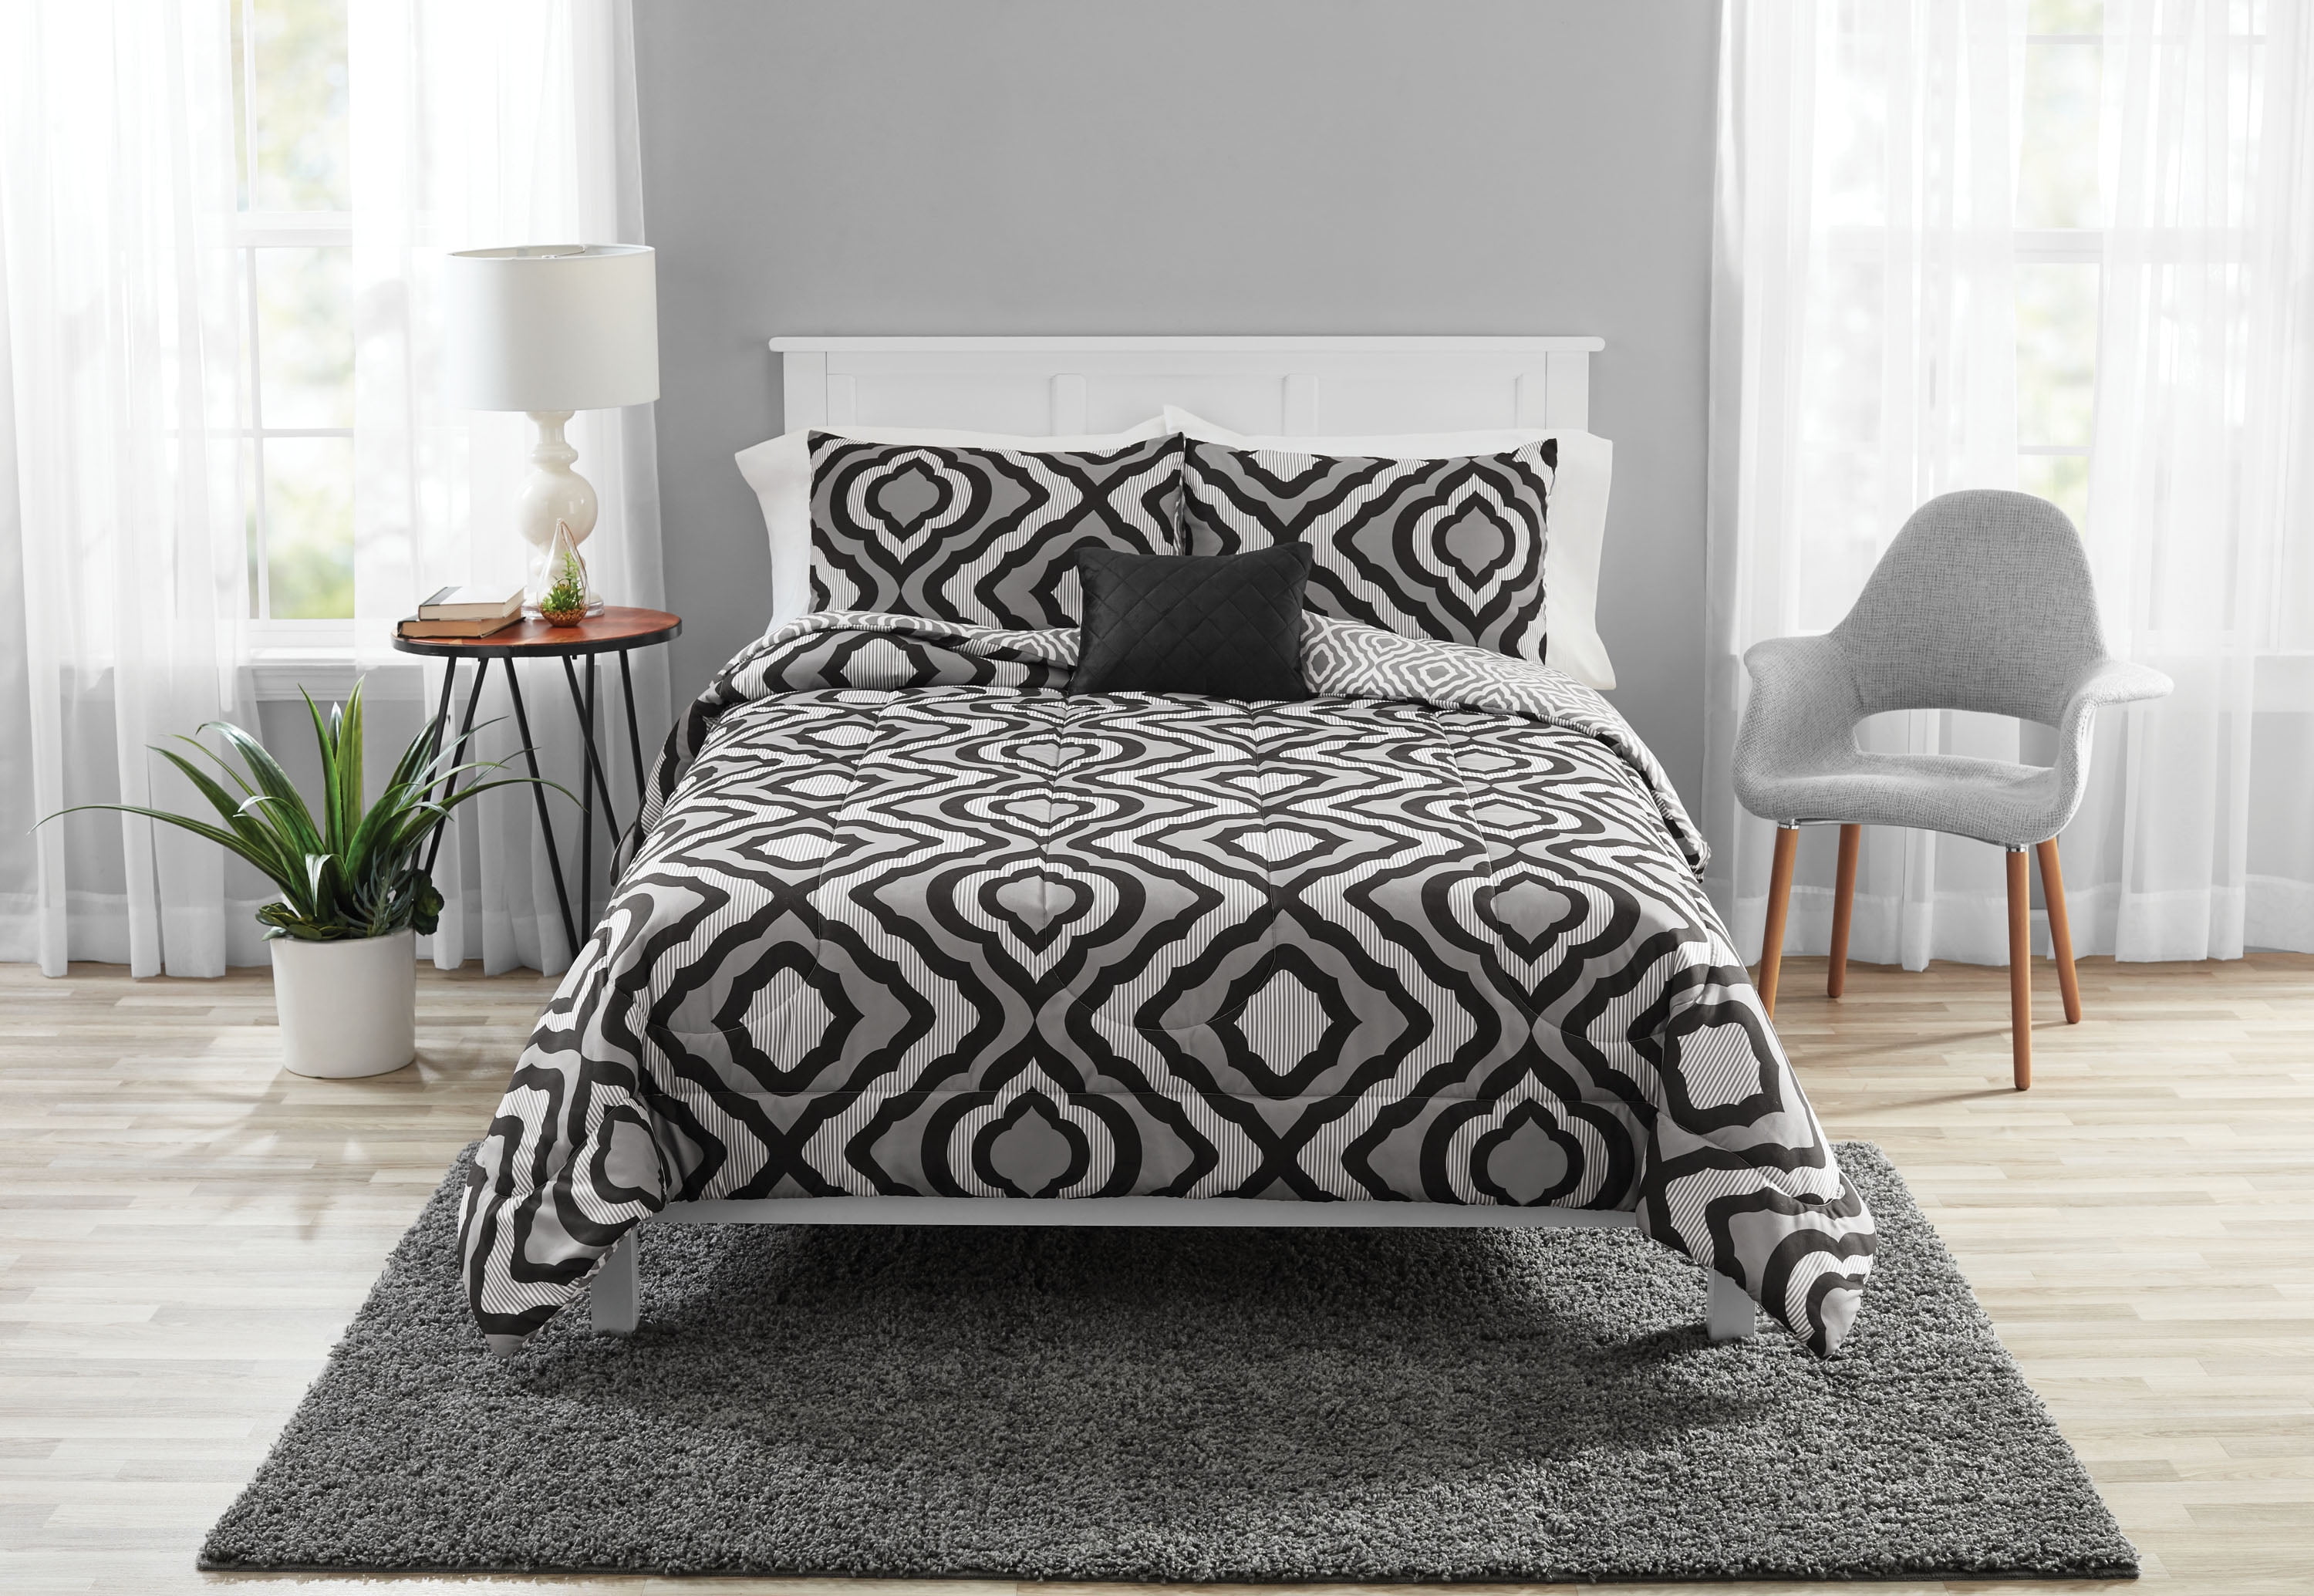 Mainstays Bree 8-Piece Black/Grey Trellis Polyester Comforter and Quilt ...